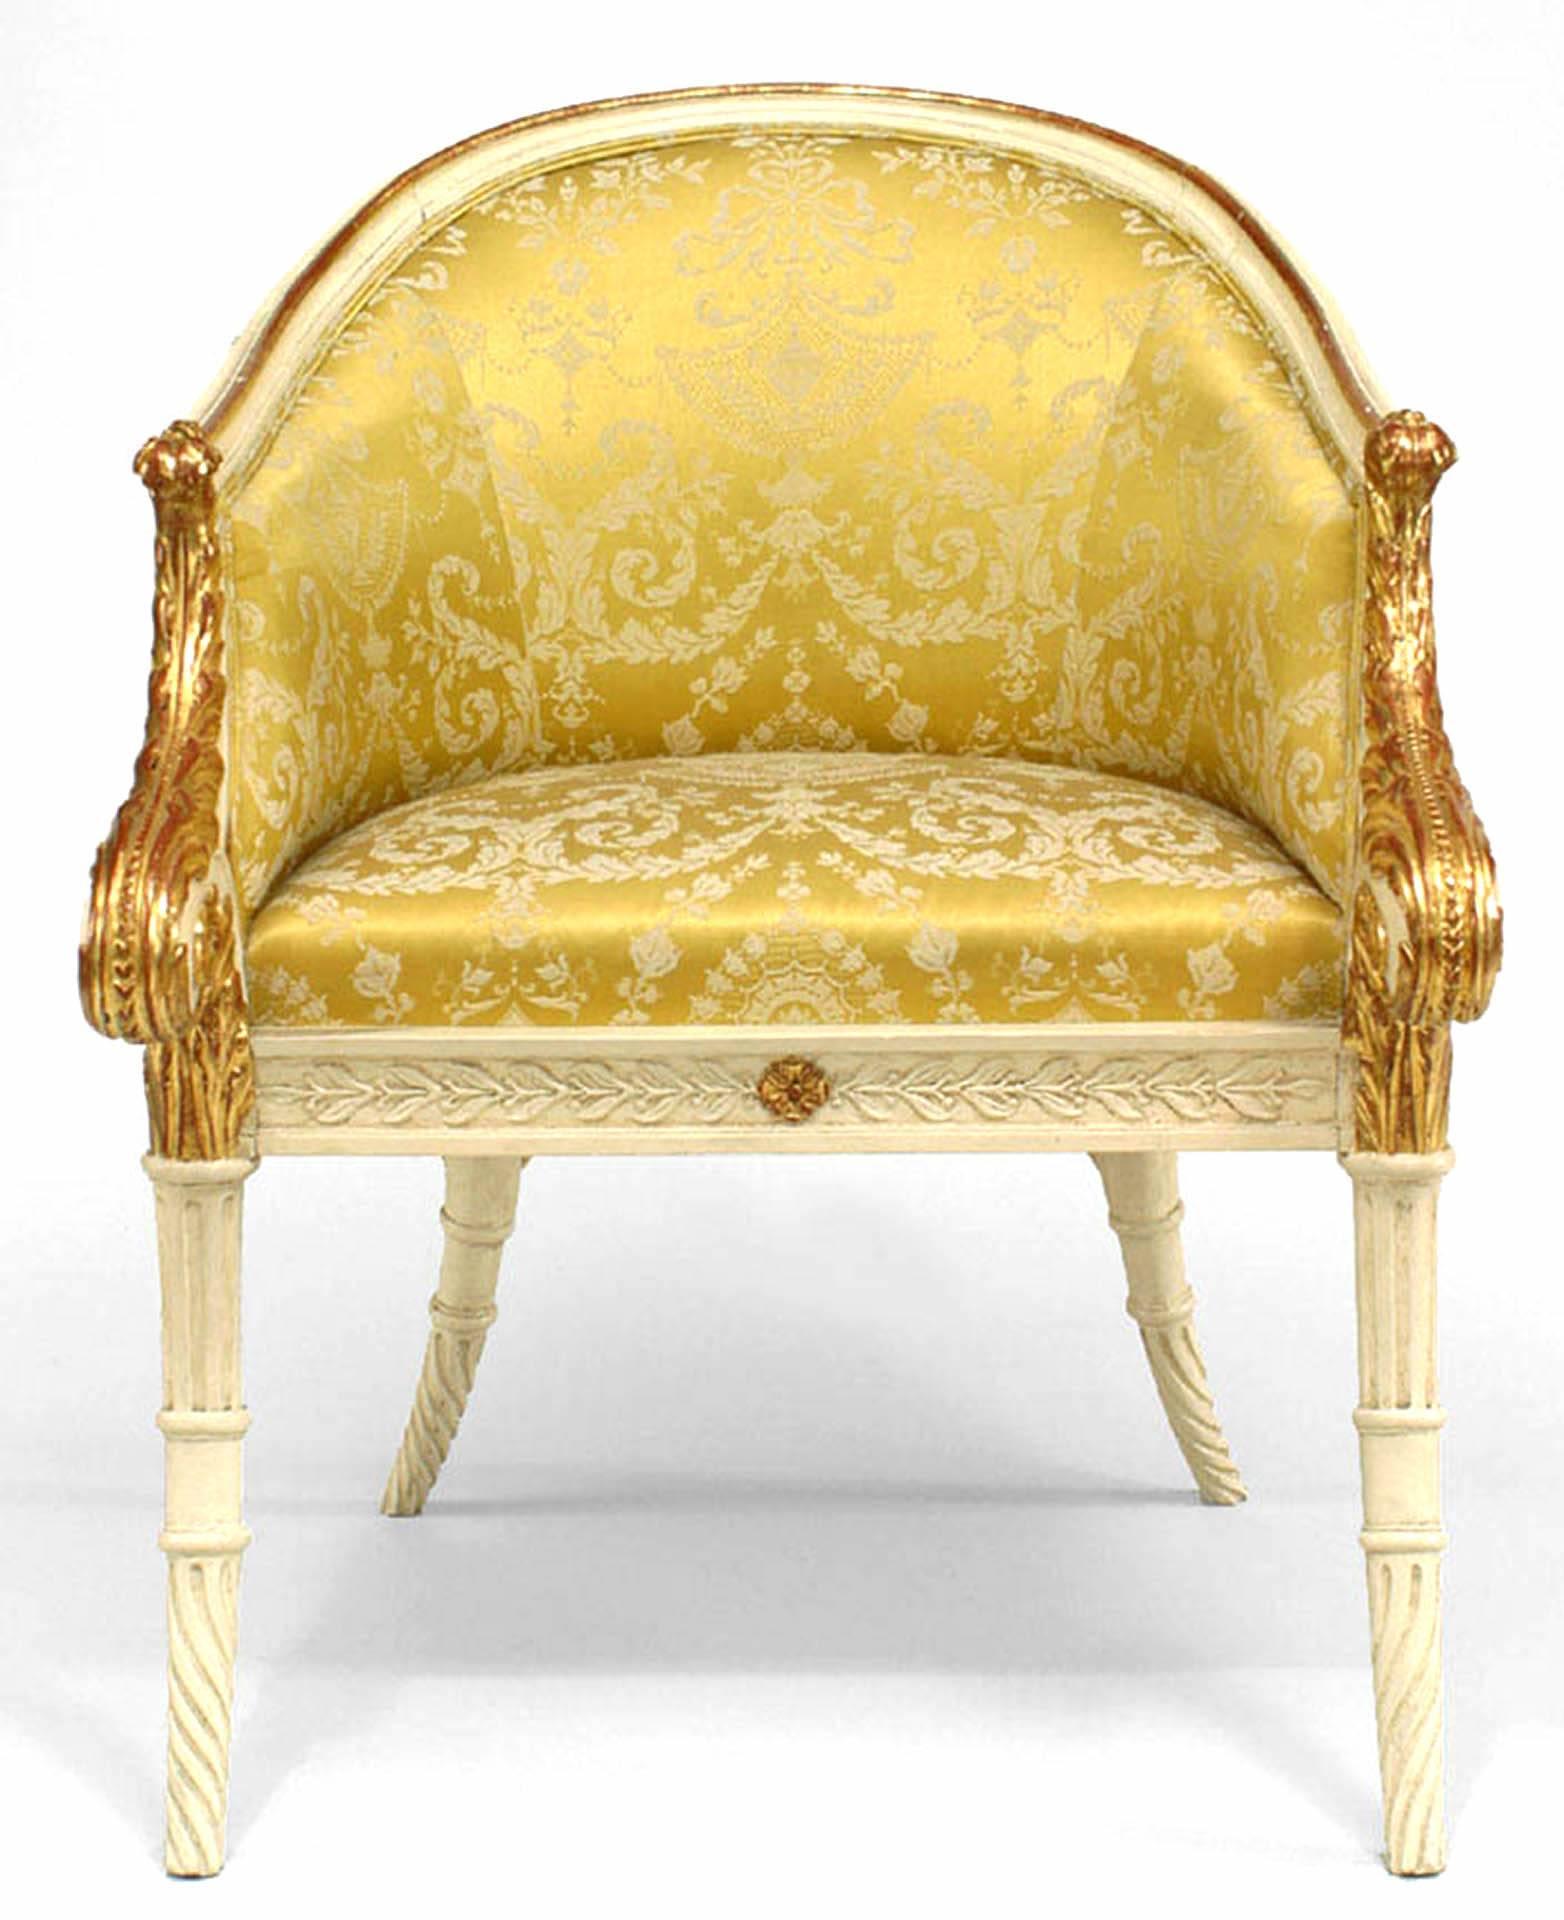 Italian neoclassic style white and gold painted round back carved armchair with front scroll design and gold damask upholstery (19th century).
 